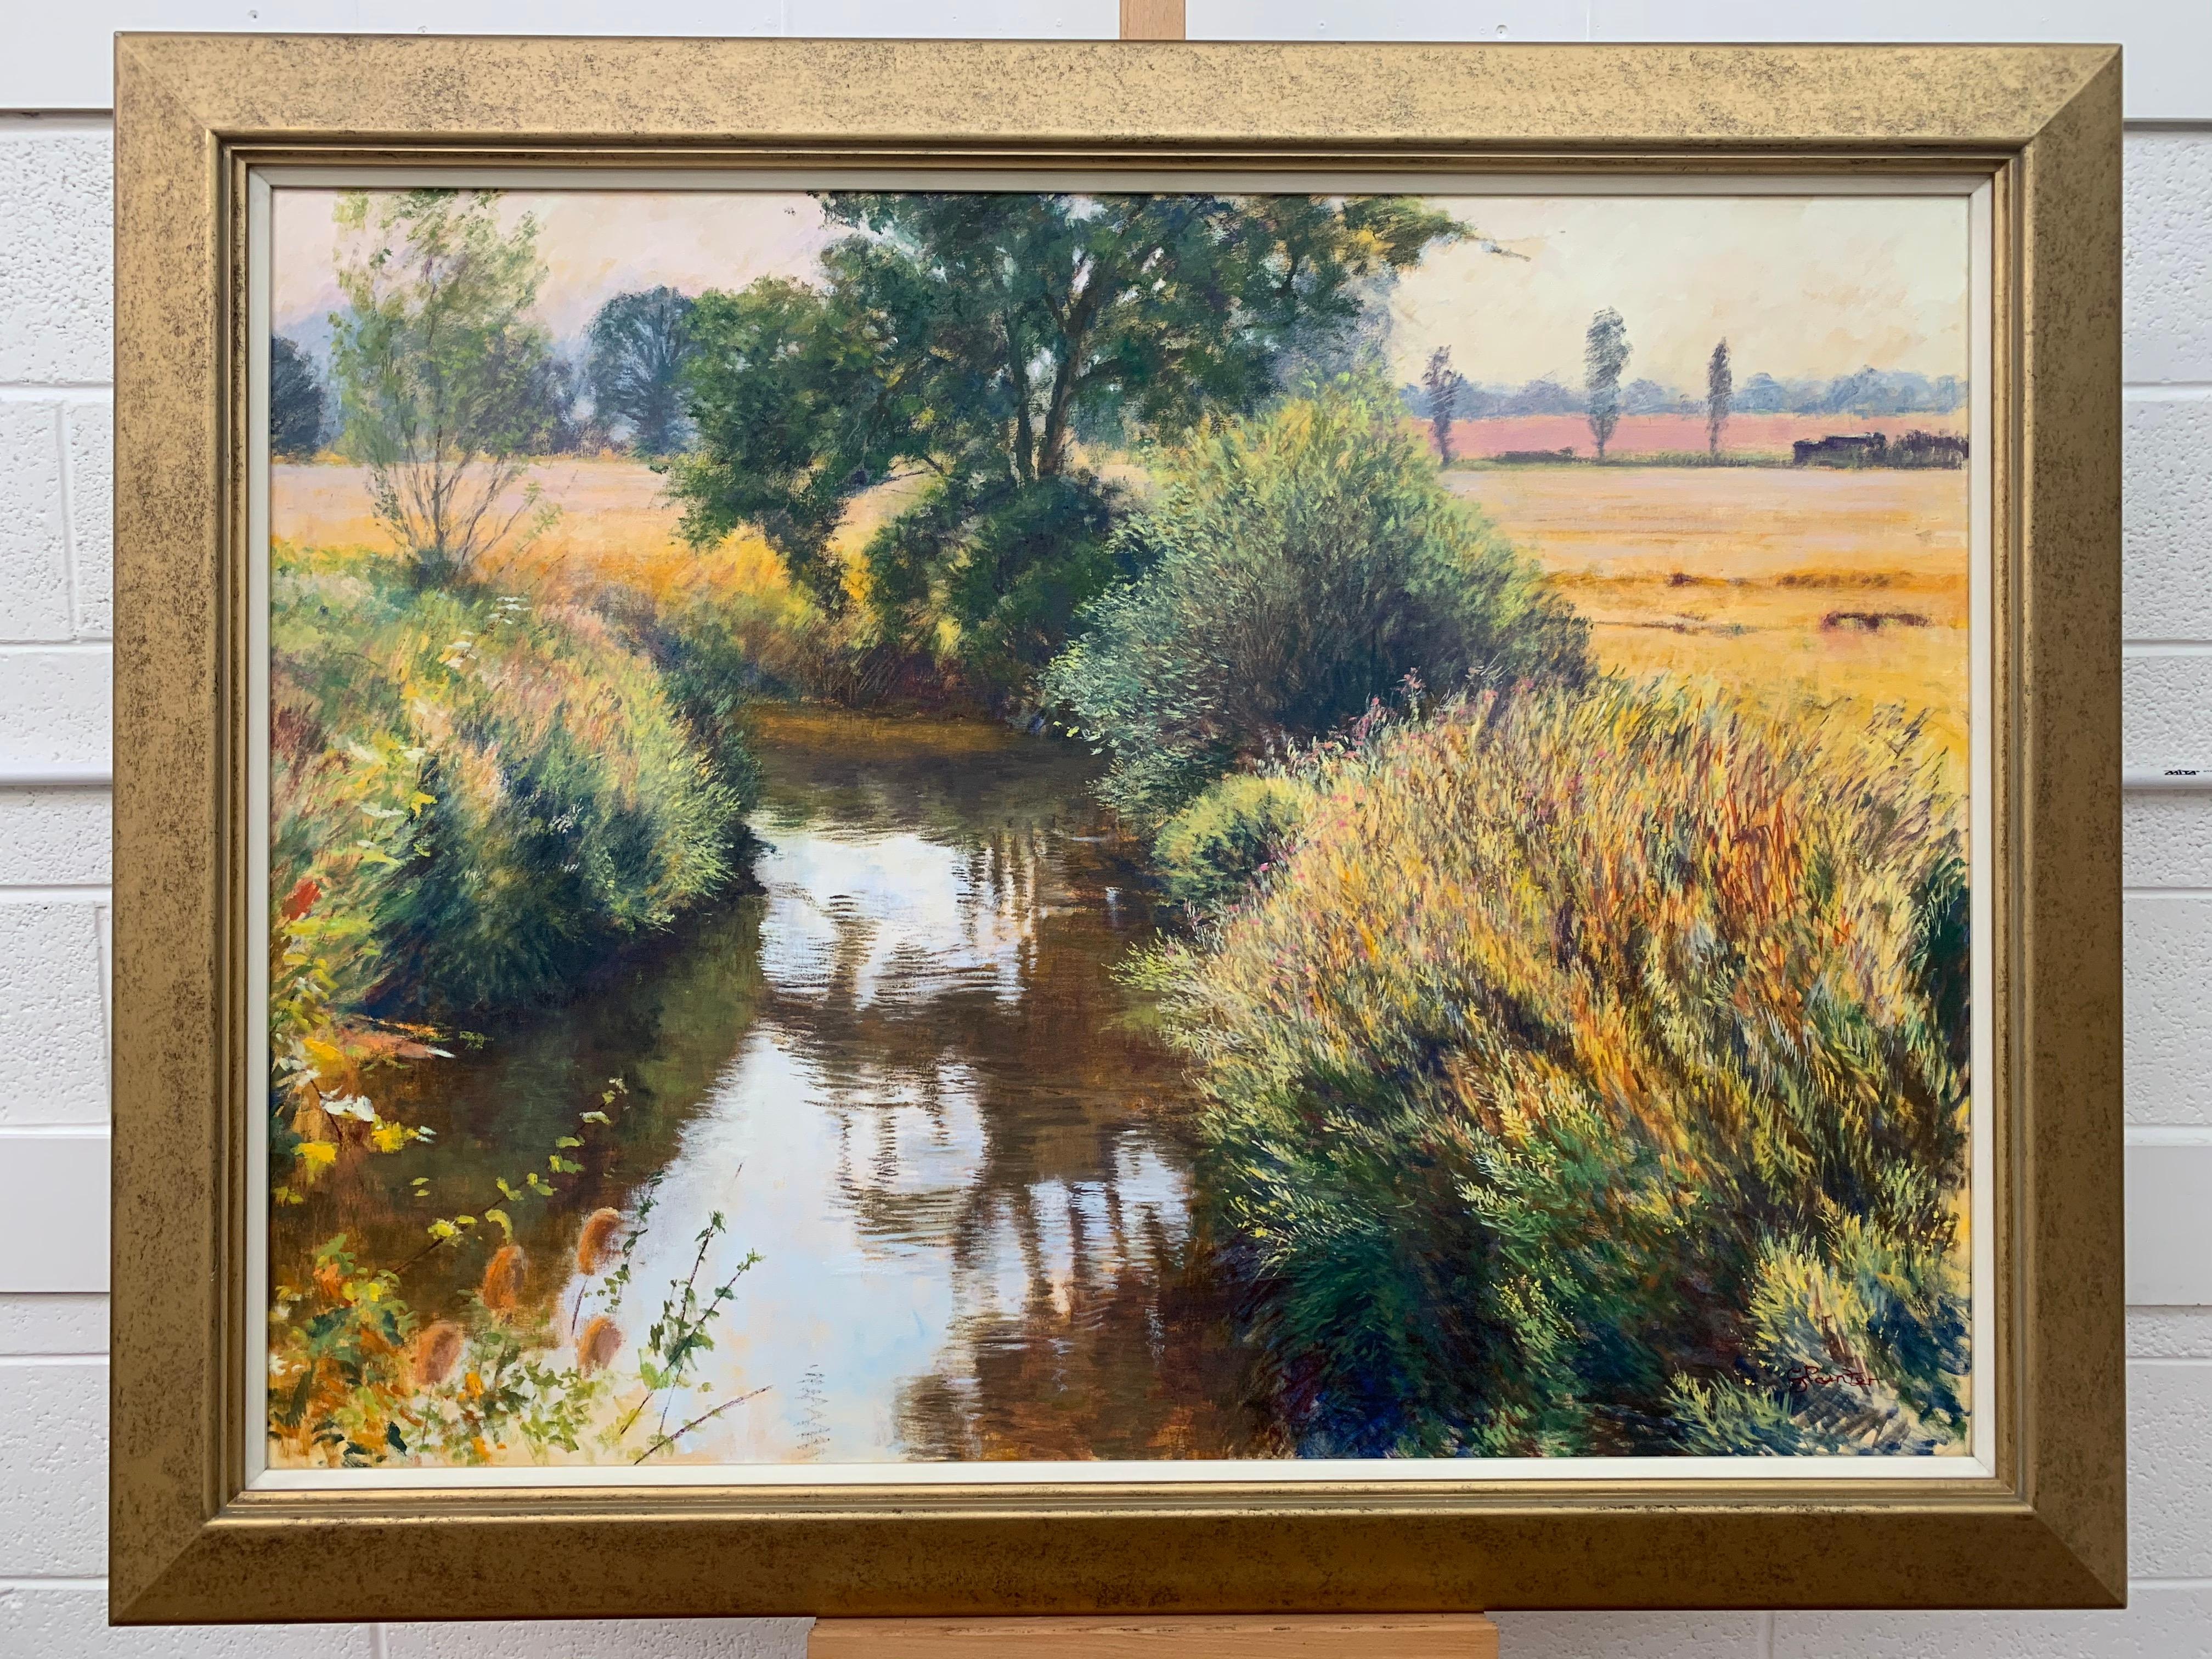 English Summer Stream River Landscape Original Oil Painting by British Artist - Brown Landscape Painting by Graham Painter